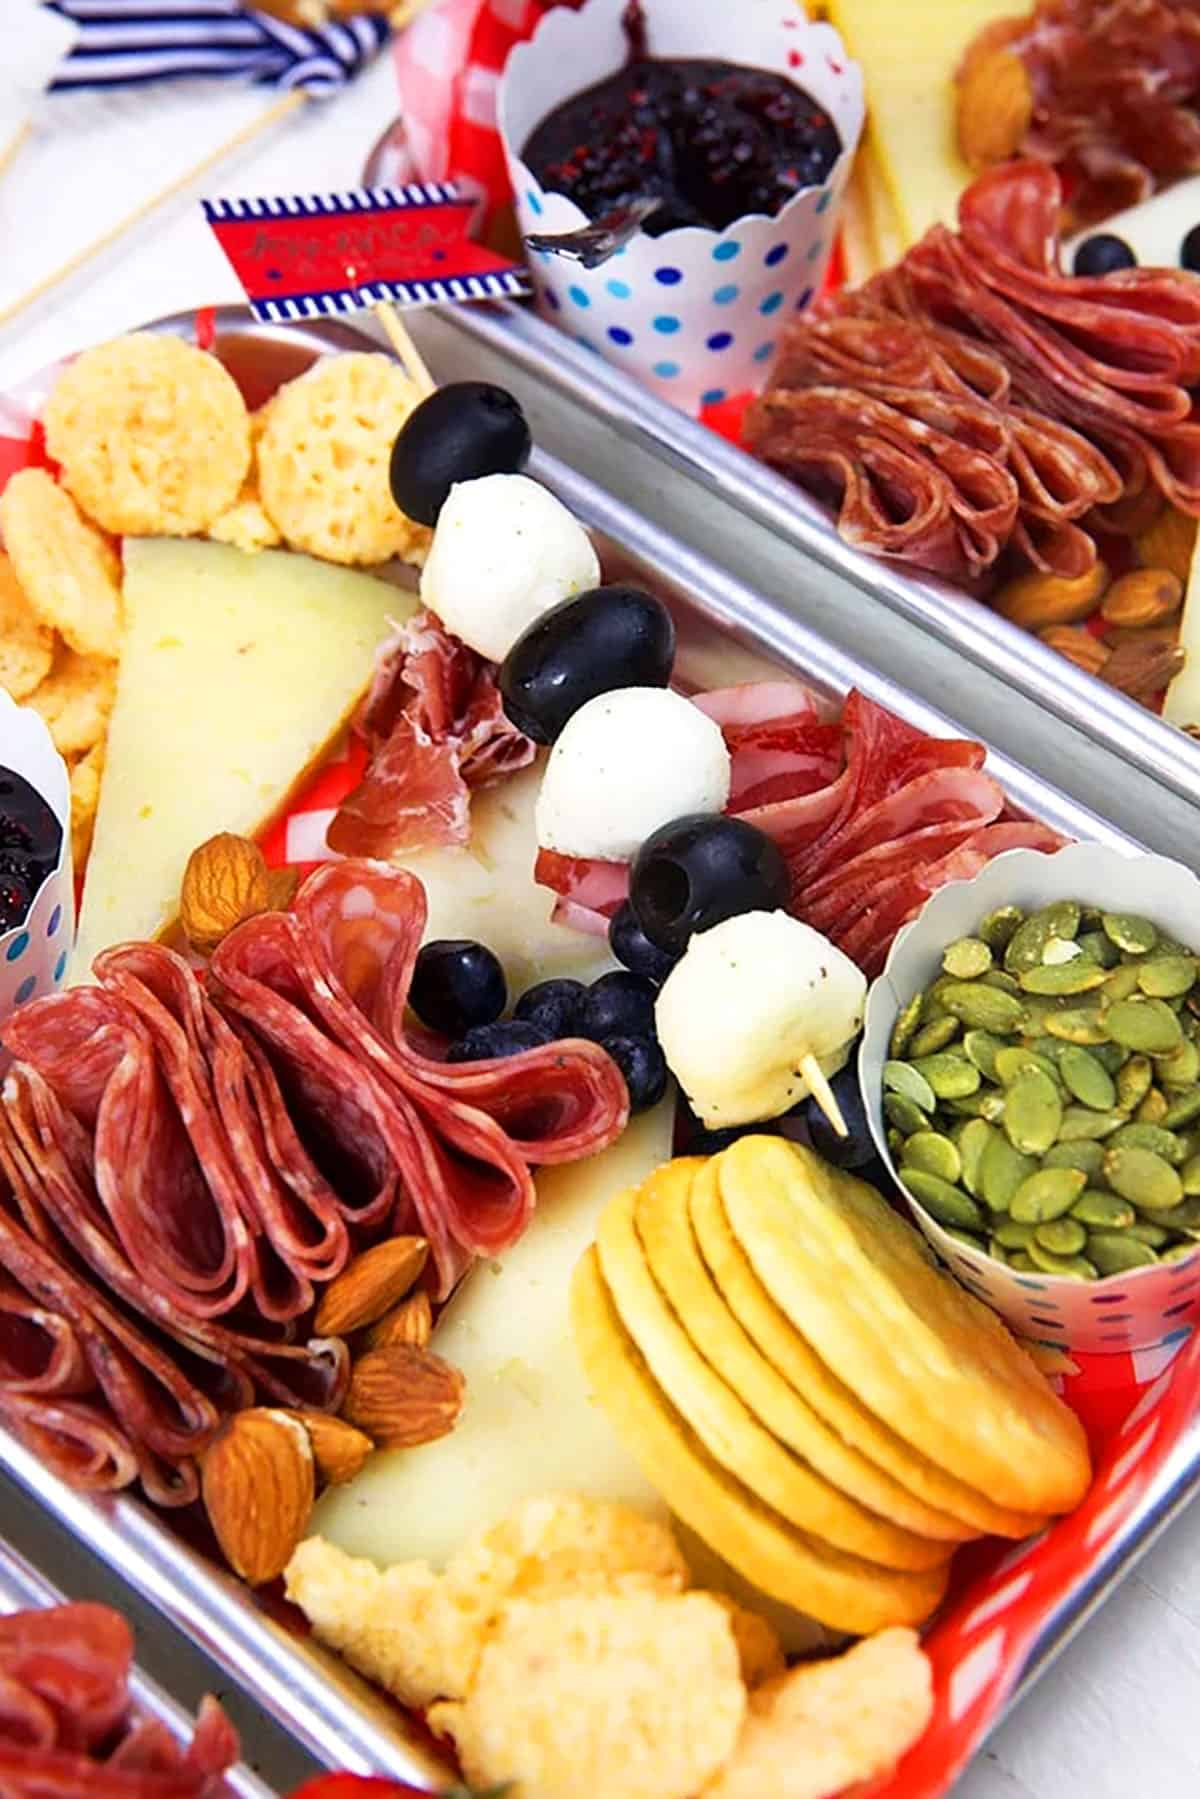 Close up of crackers and charcuterie items on a stainless steel tray.